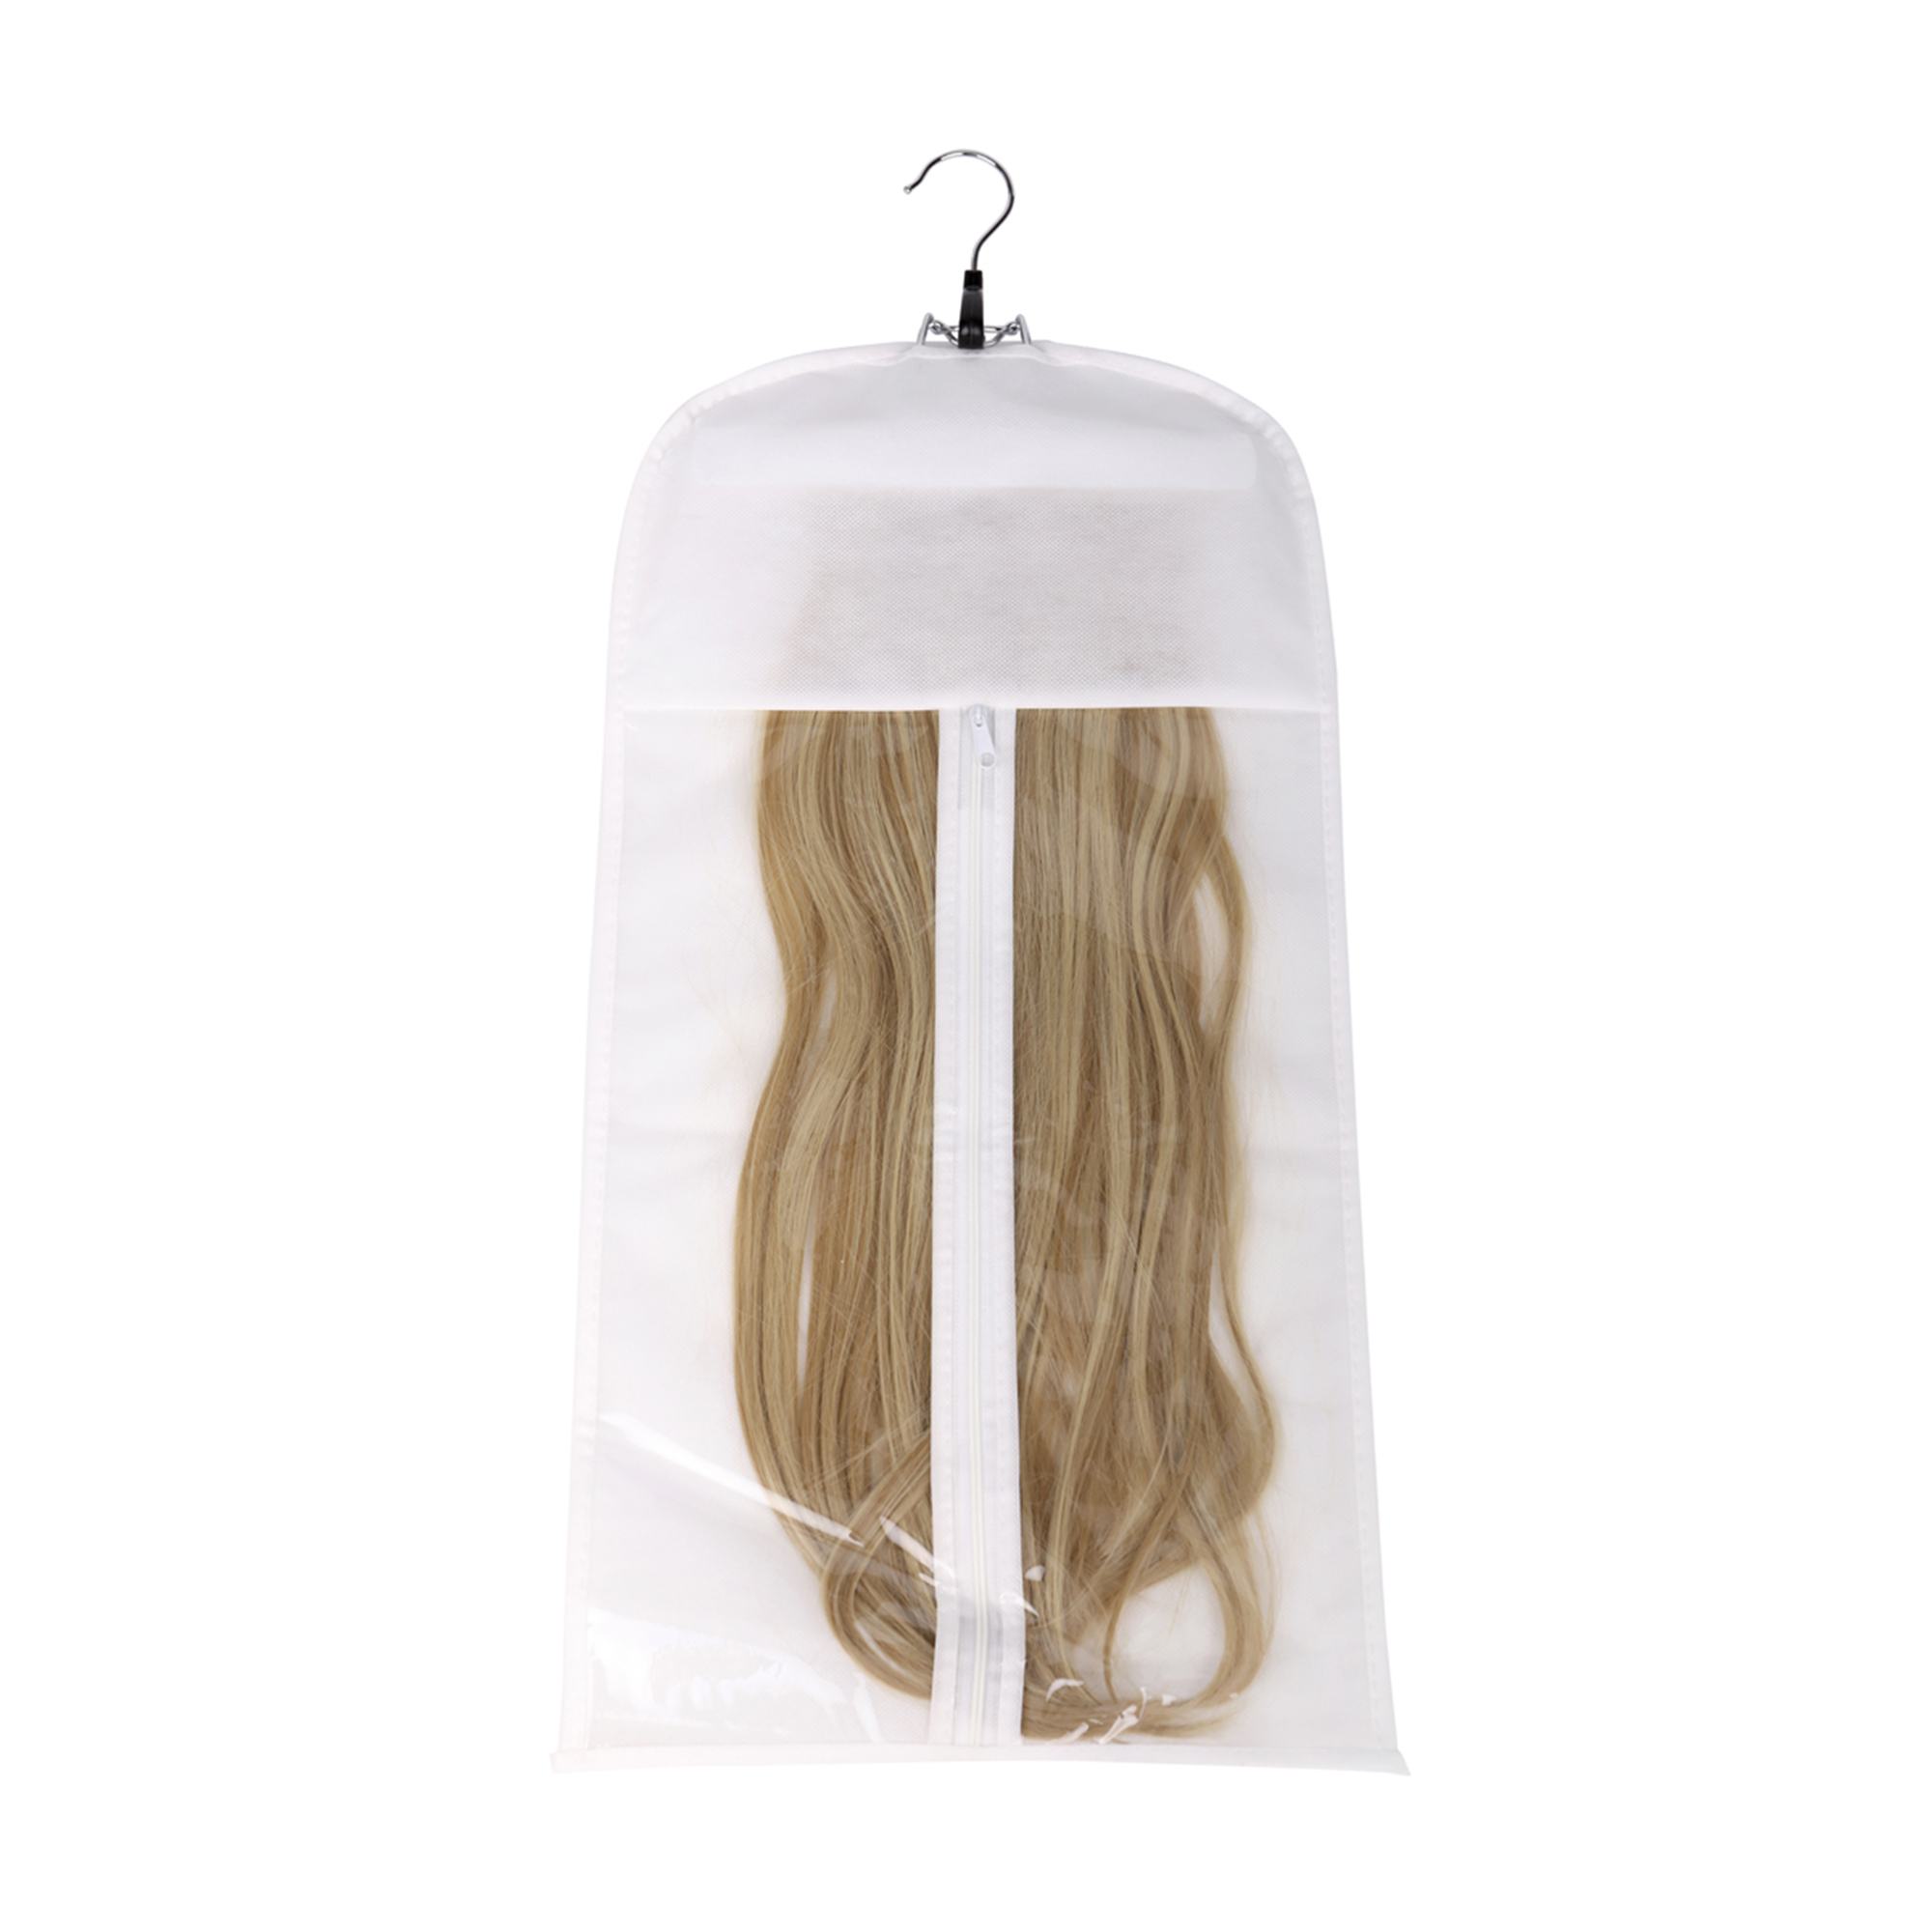 Hair Extensions Storage Bag With Wooden Hanger Holder Dust-Proof Wig Storage Bag Protection Carrier Case with Zipper for Travel and Daily Use - image 1 of 8